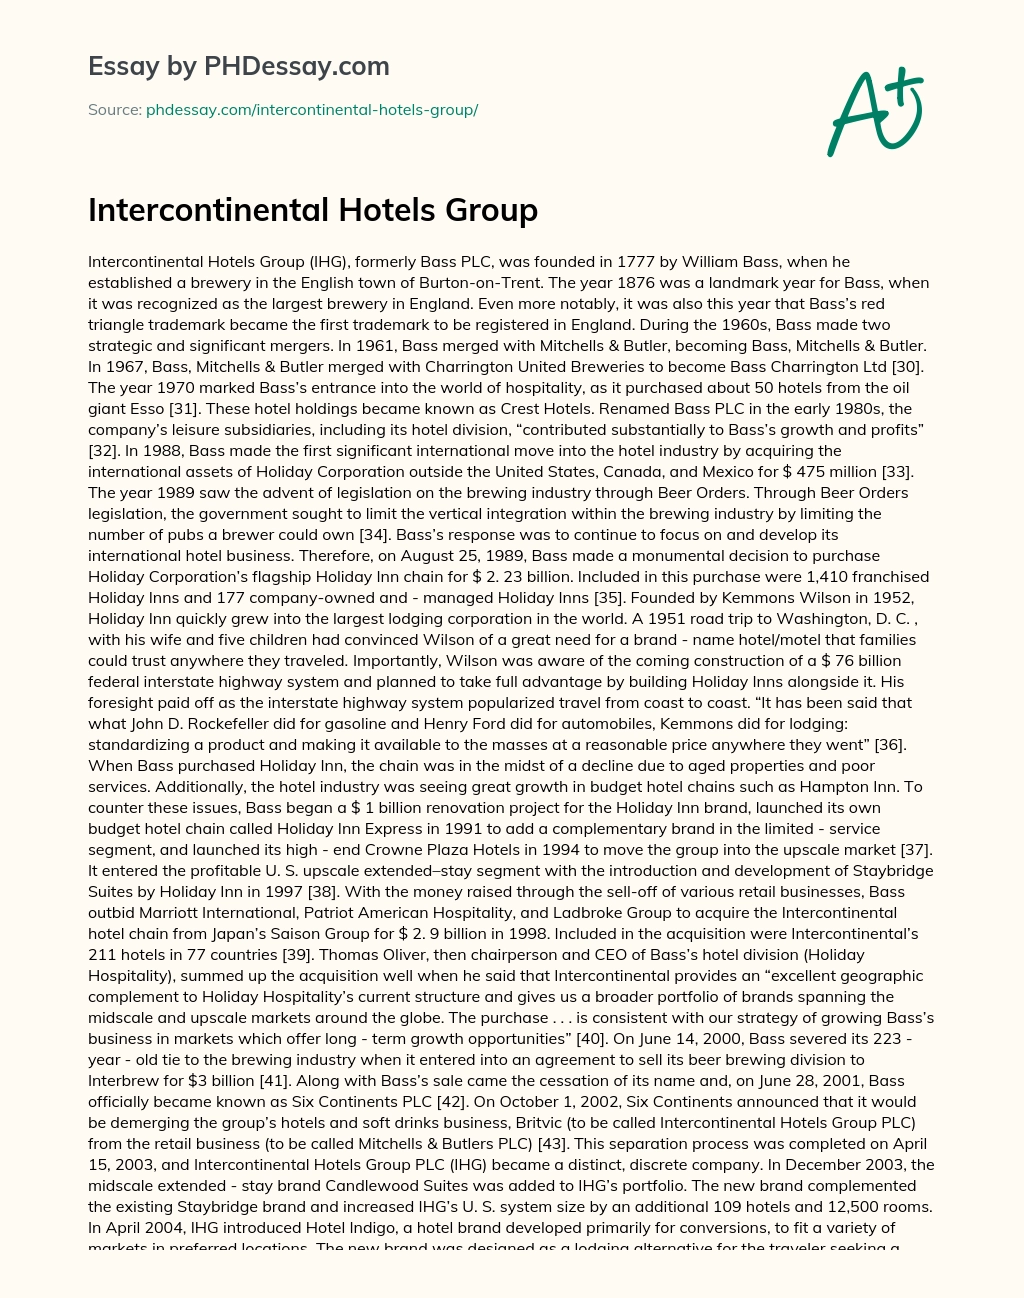 Intercontinental Hotels Group essay